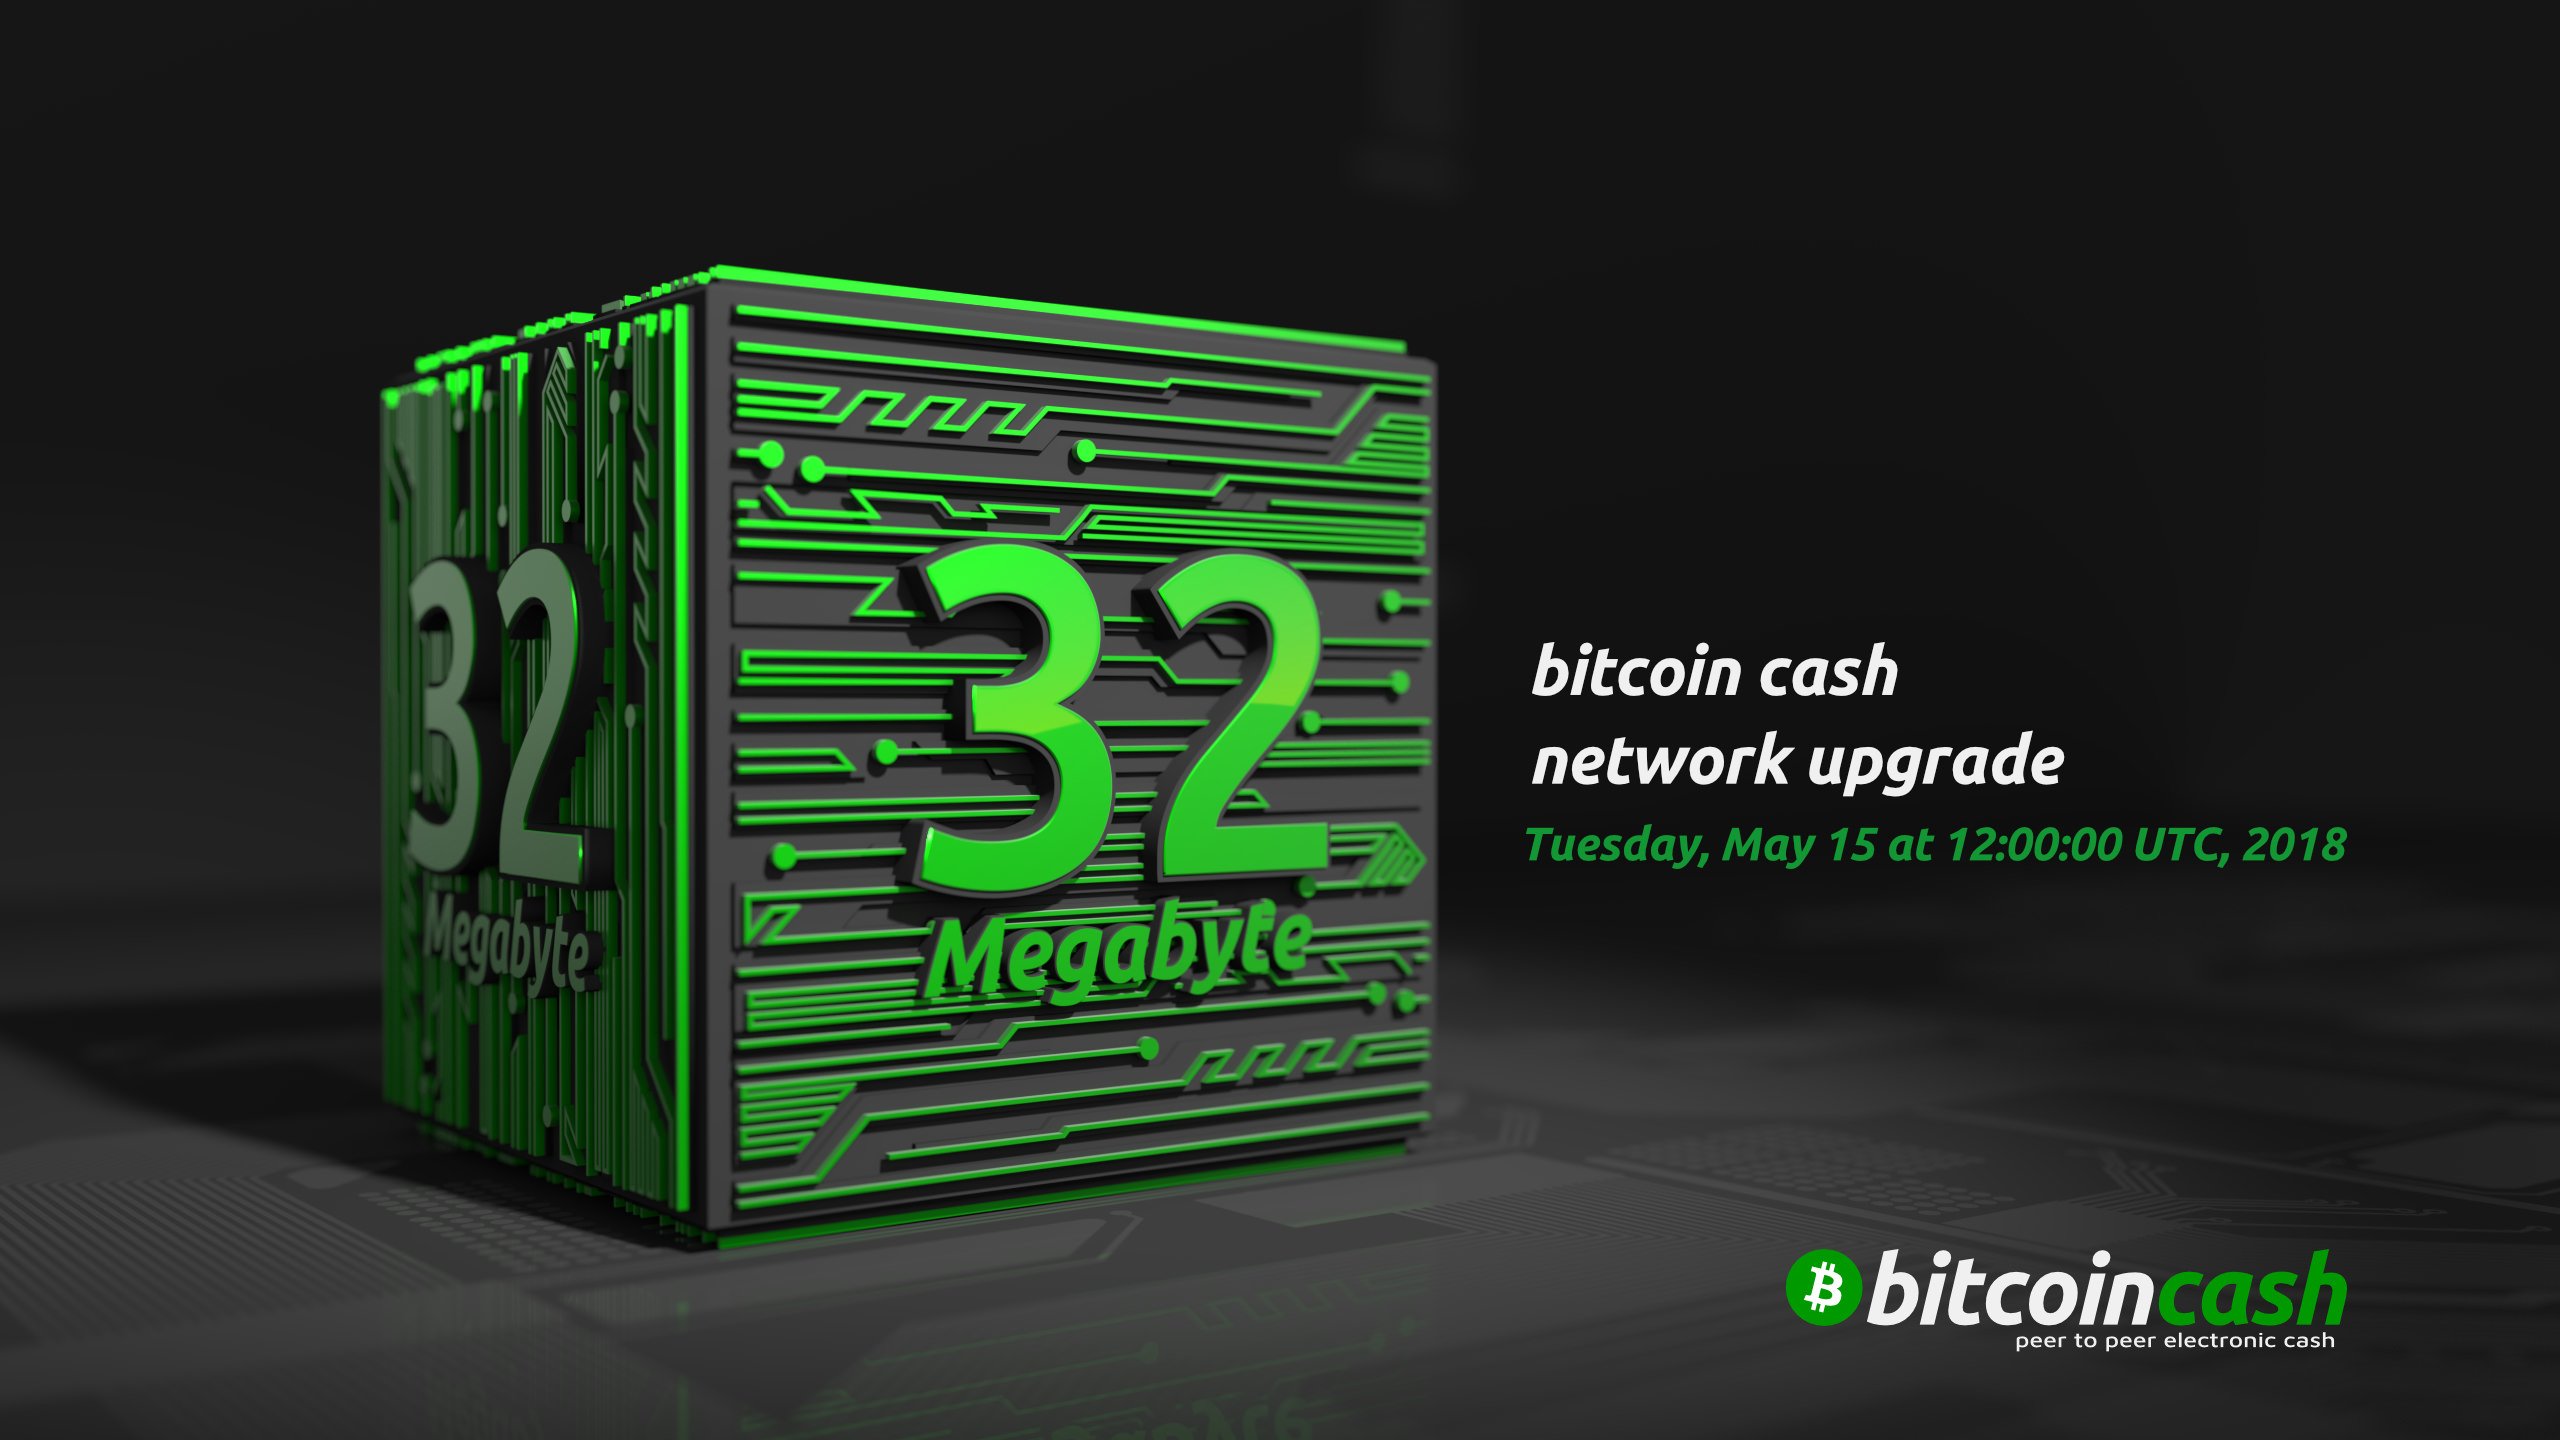 Five Reasons Why Bitcoin Cash is About to Win Big